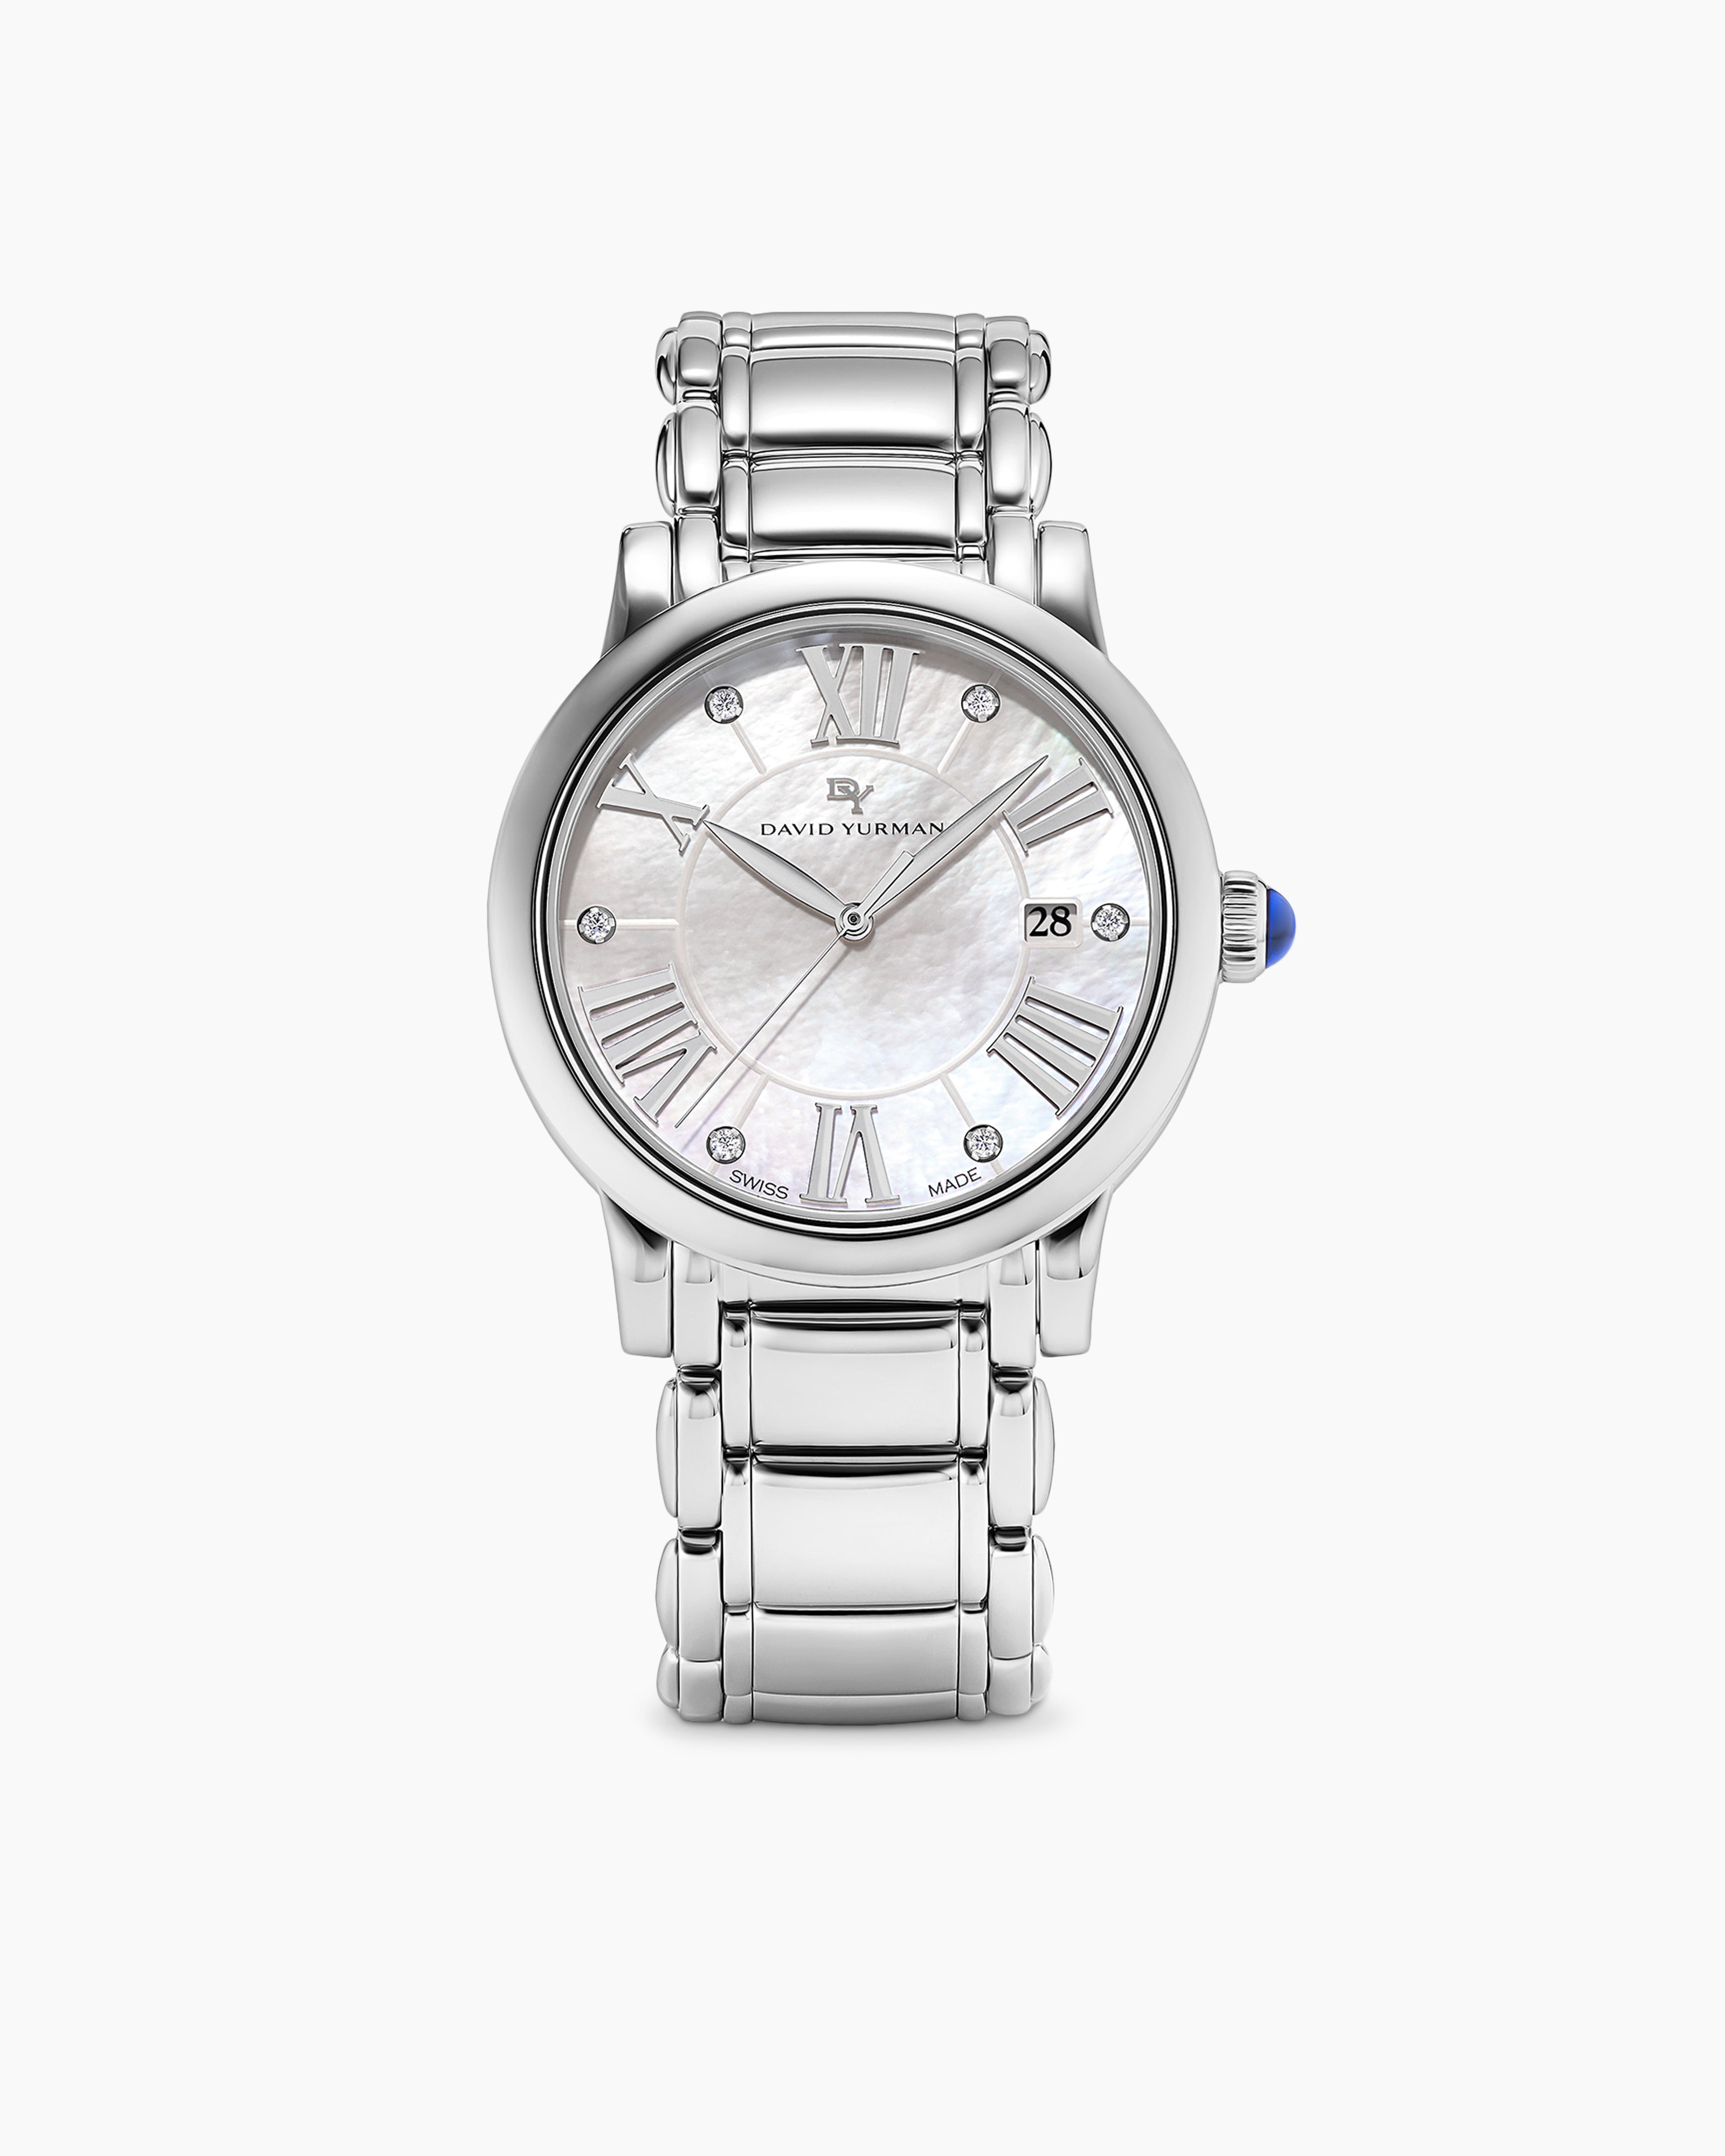 Amazon.com: DAVID GUNER Elegant Men's Watch : Perfect Gifts for Him,  Luxurious Silver Black Watches for Men, Ideal for Any Occasion : Designed  in San Diego California: Clothing, Shoes & Jewelry